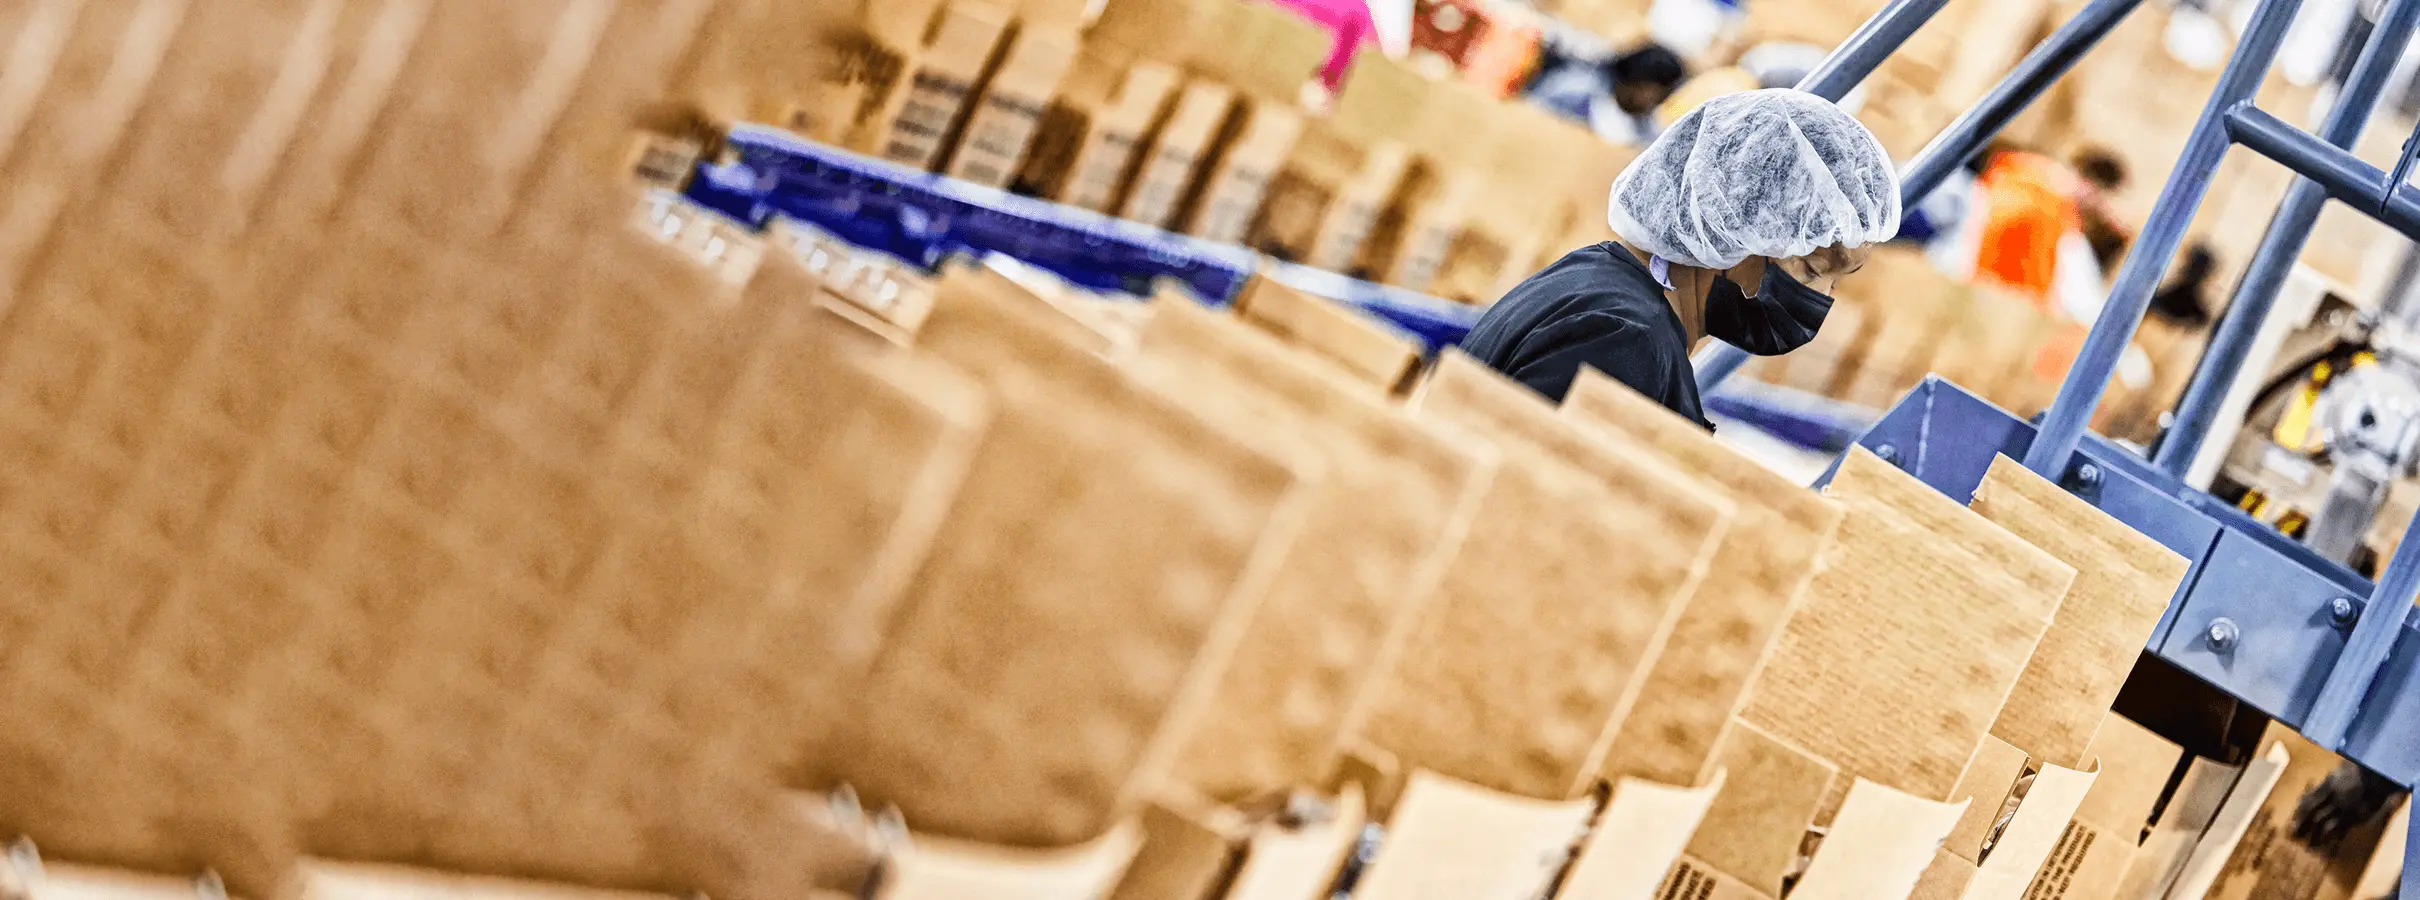 Worker in a manufacturing company looking at boxes go down a manufacturing line